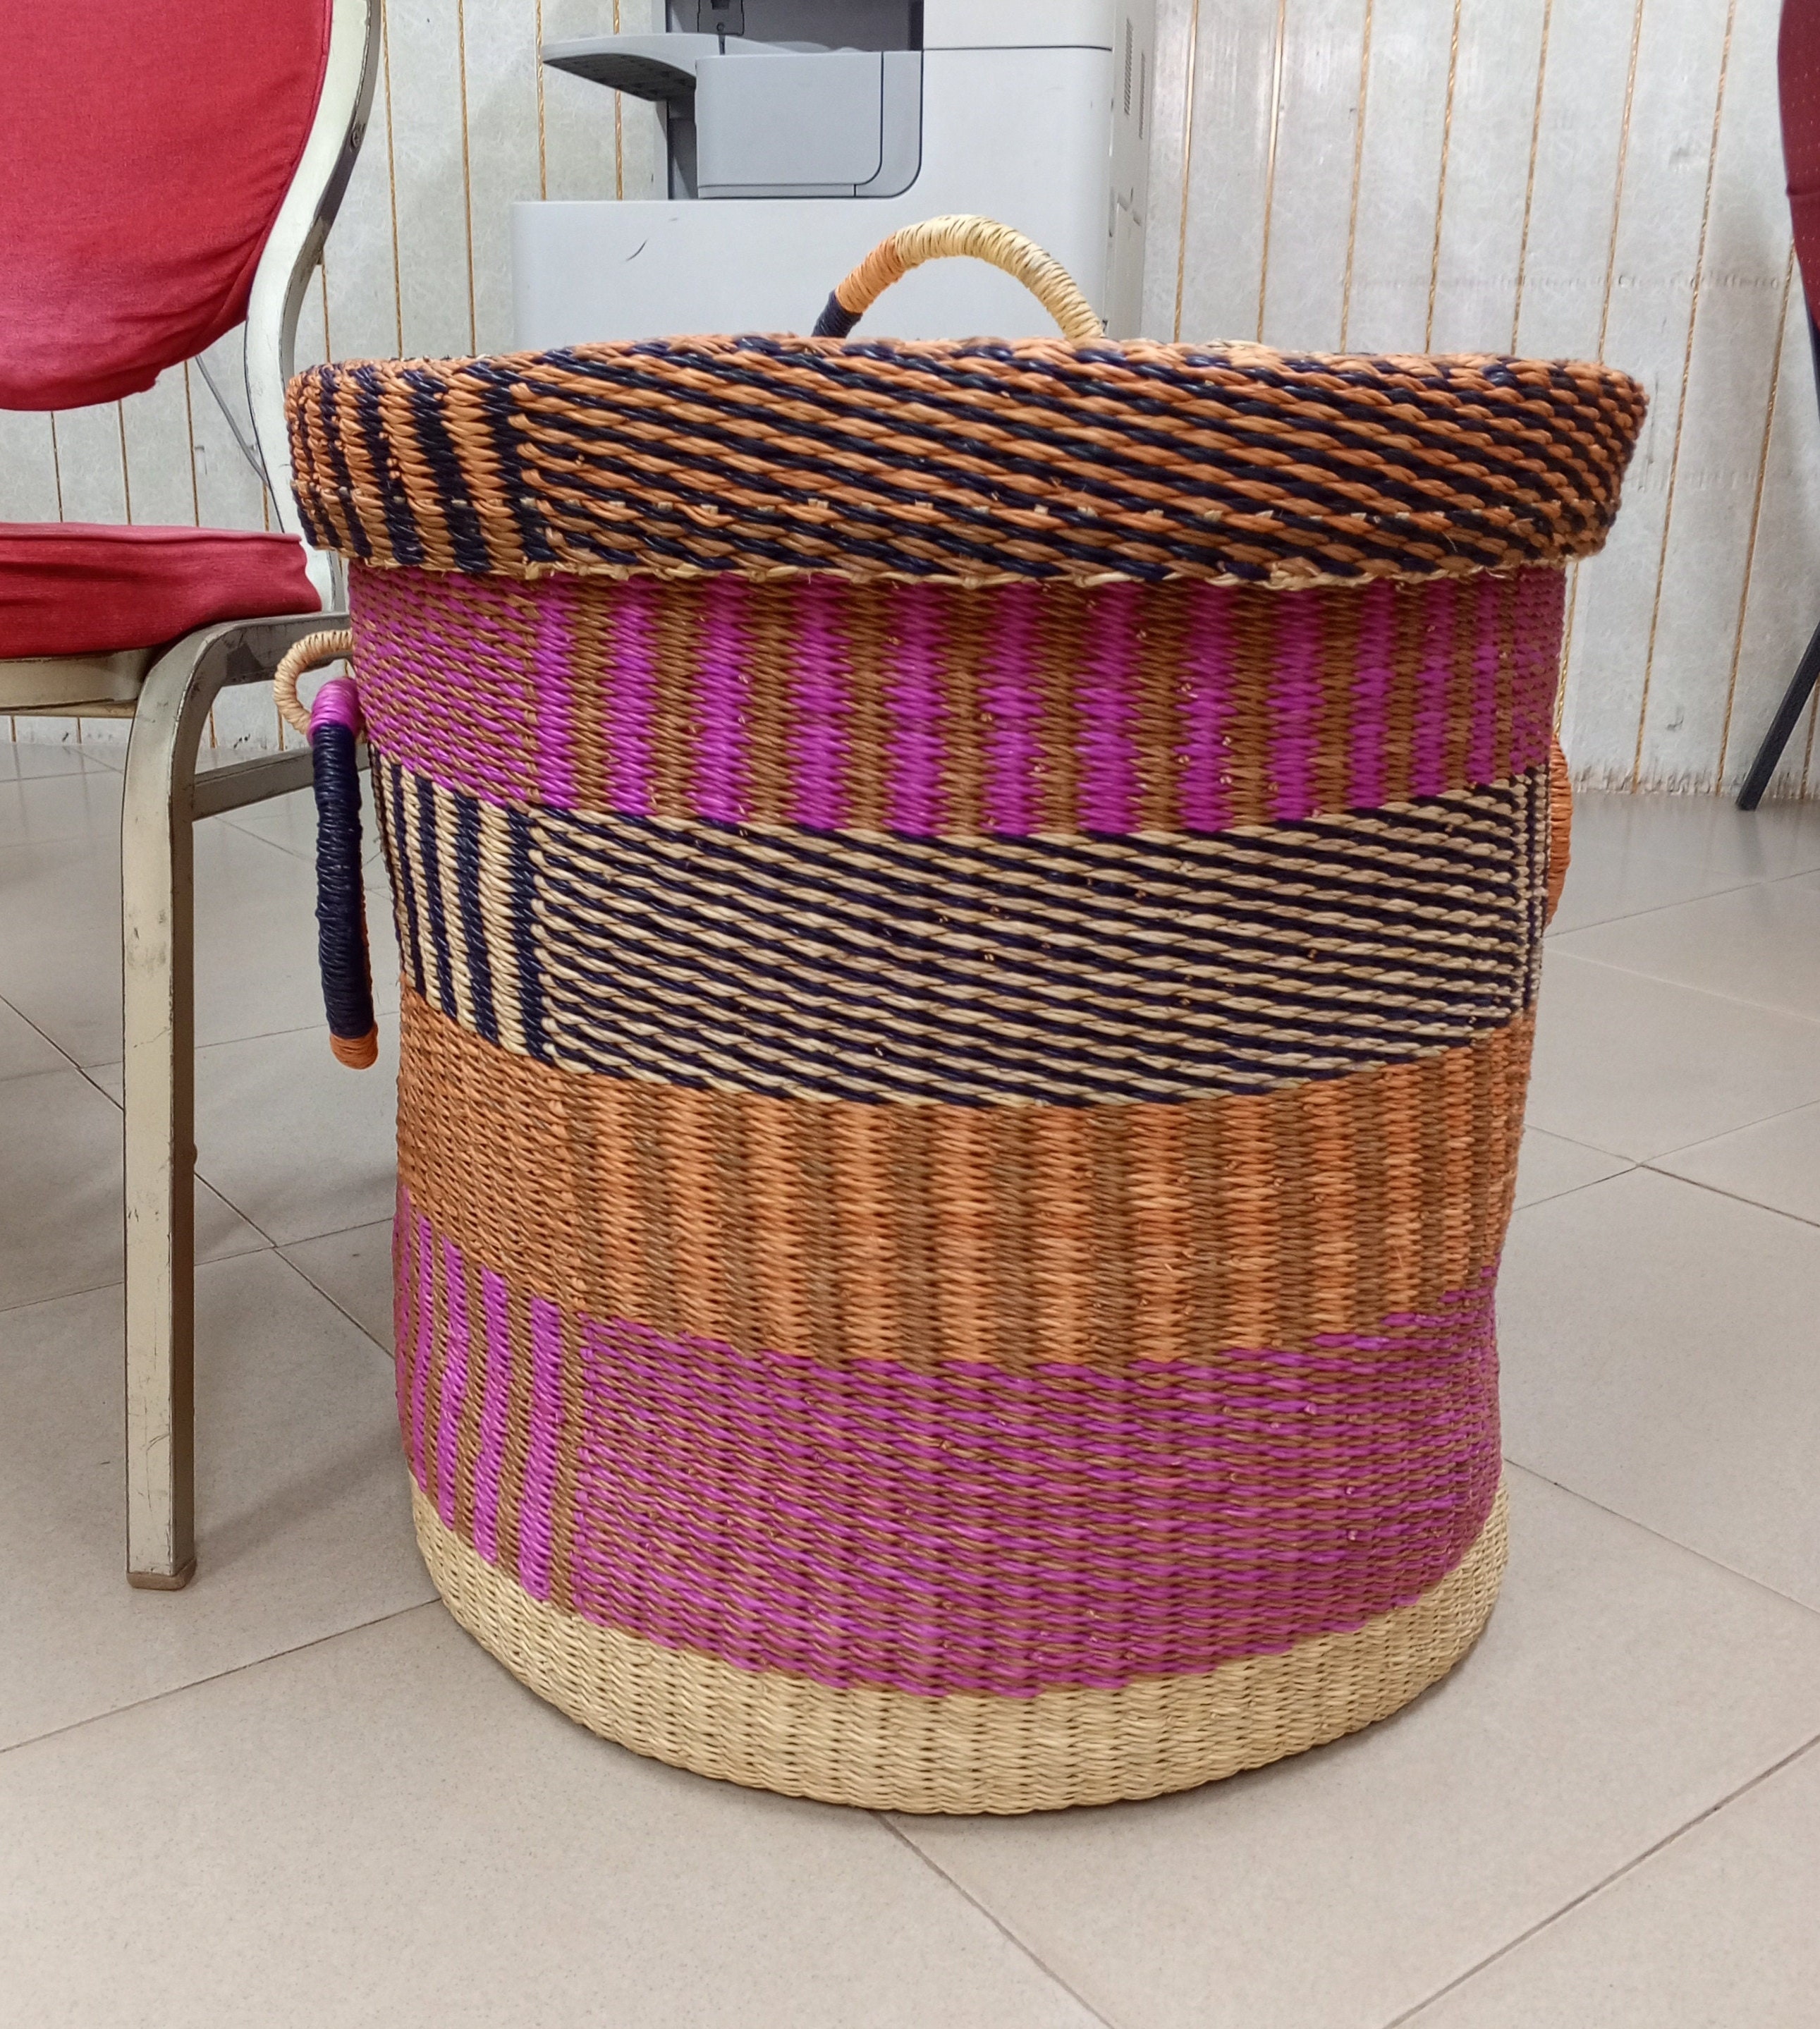 Collapsible Laundry Basket, Floral Printing Large Laundry Hamper